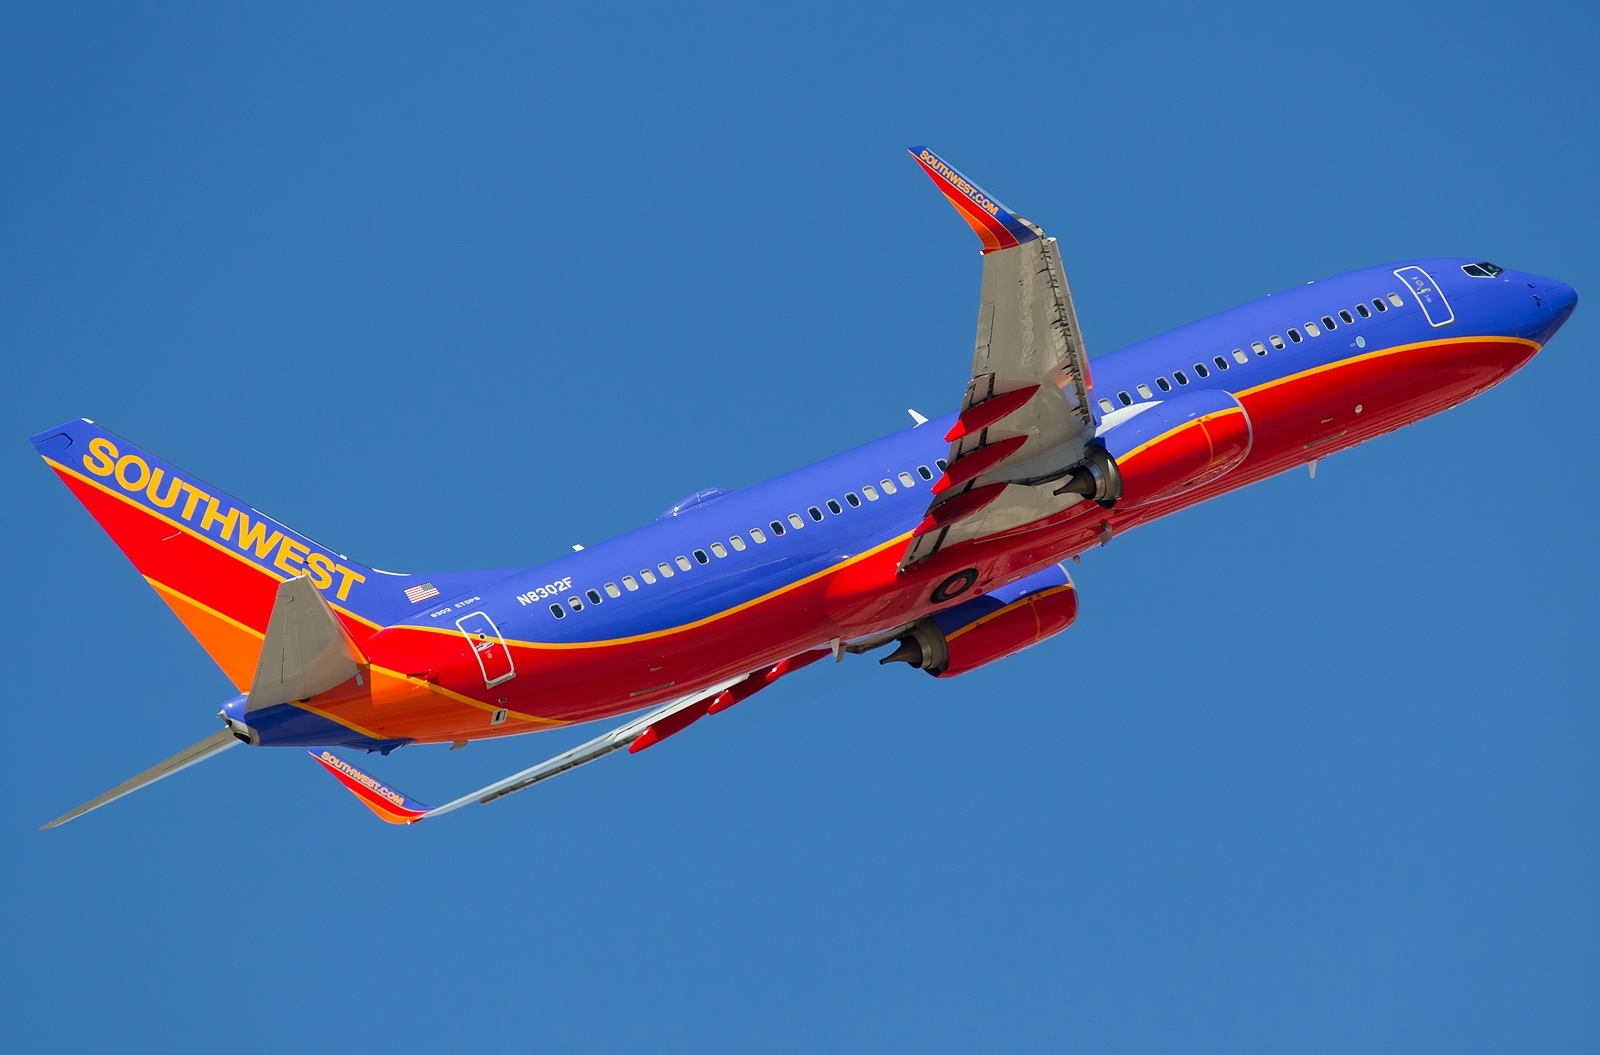 boeing 737 800 southwest airlines southwest airlines boeing 737 800